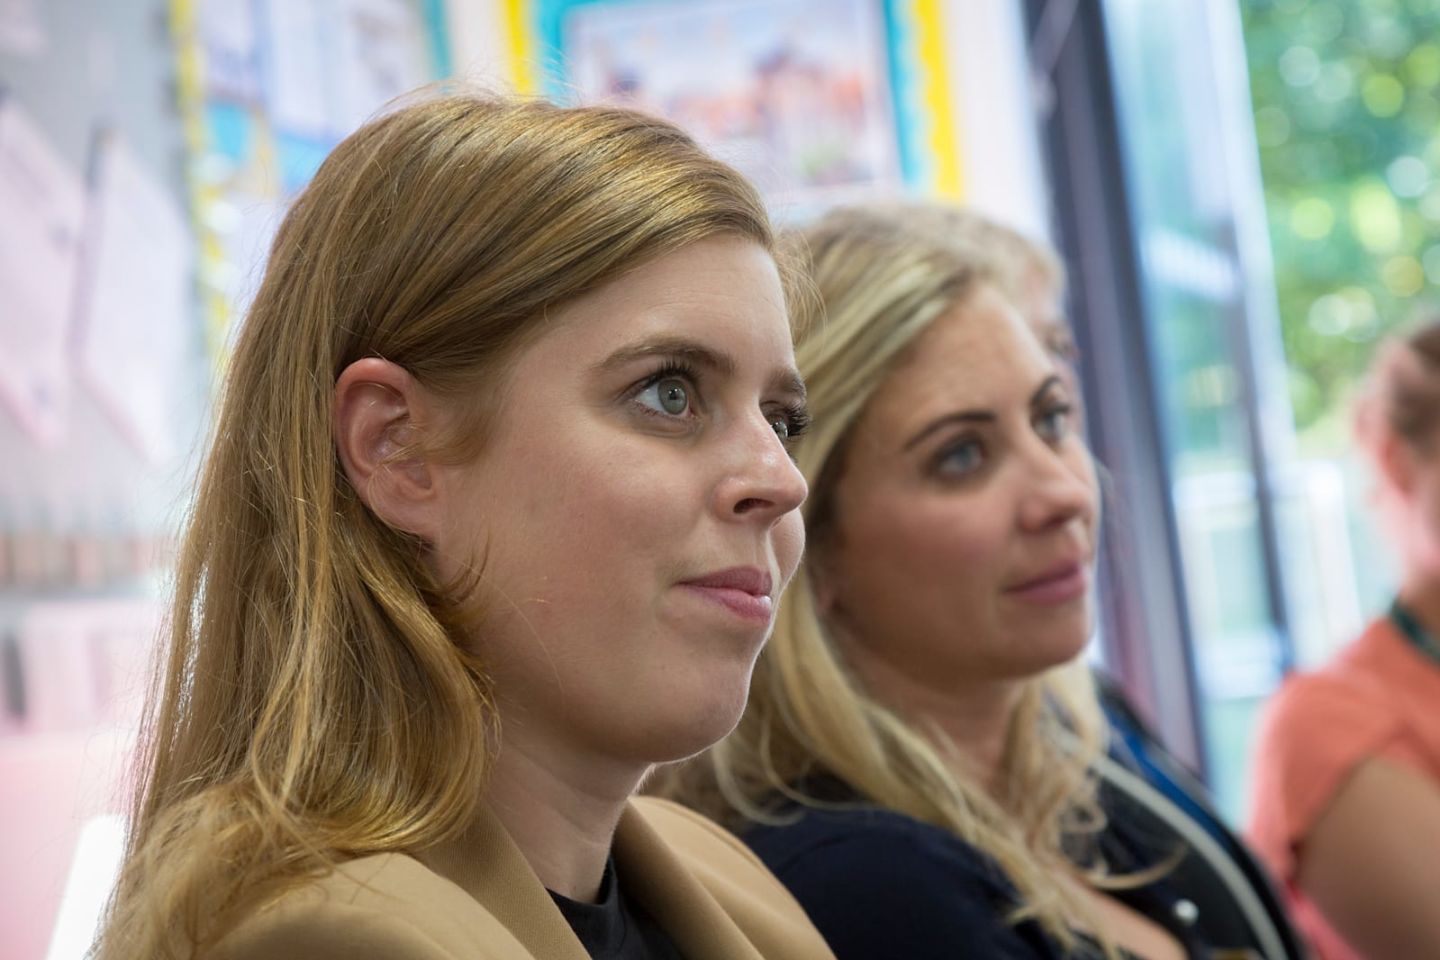 Holly Branson and Princess Beatrice sat together